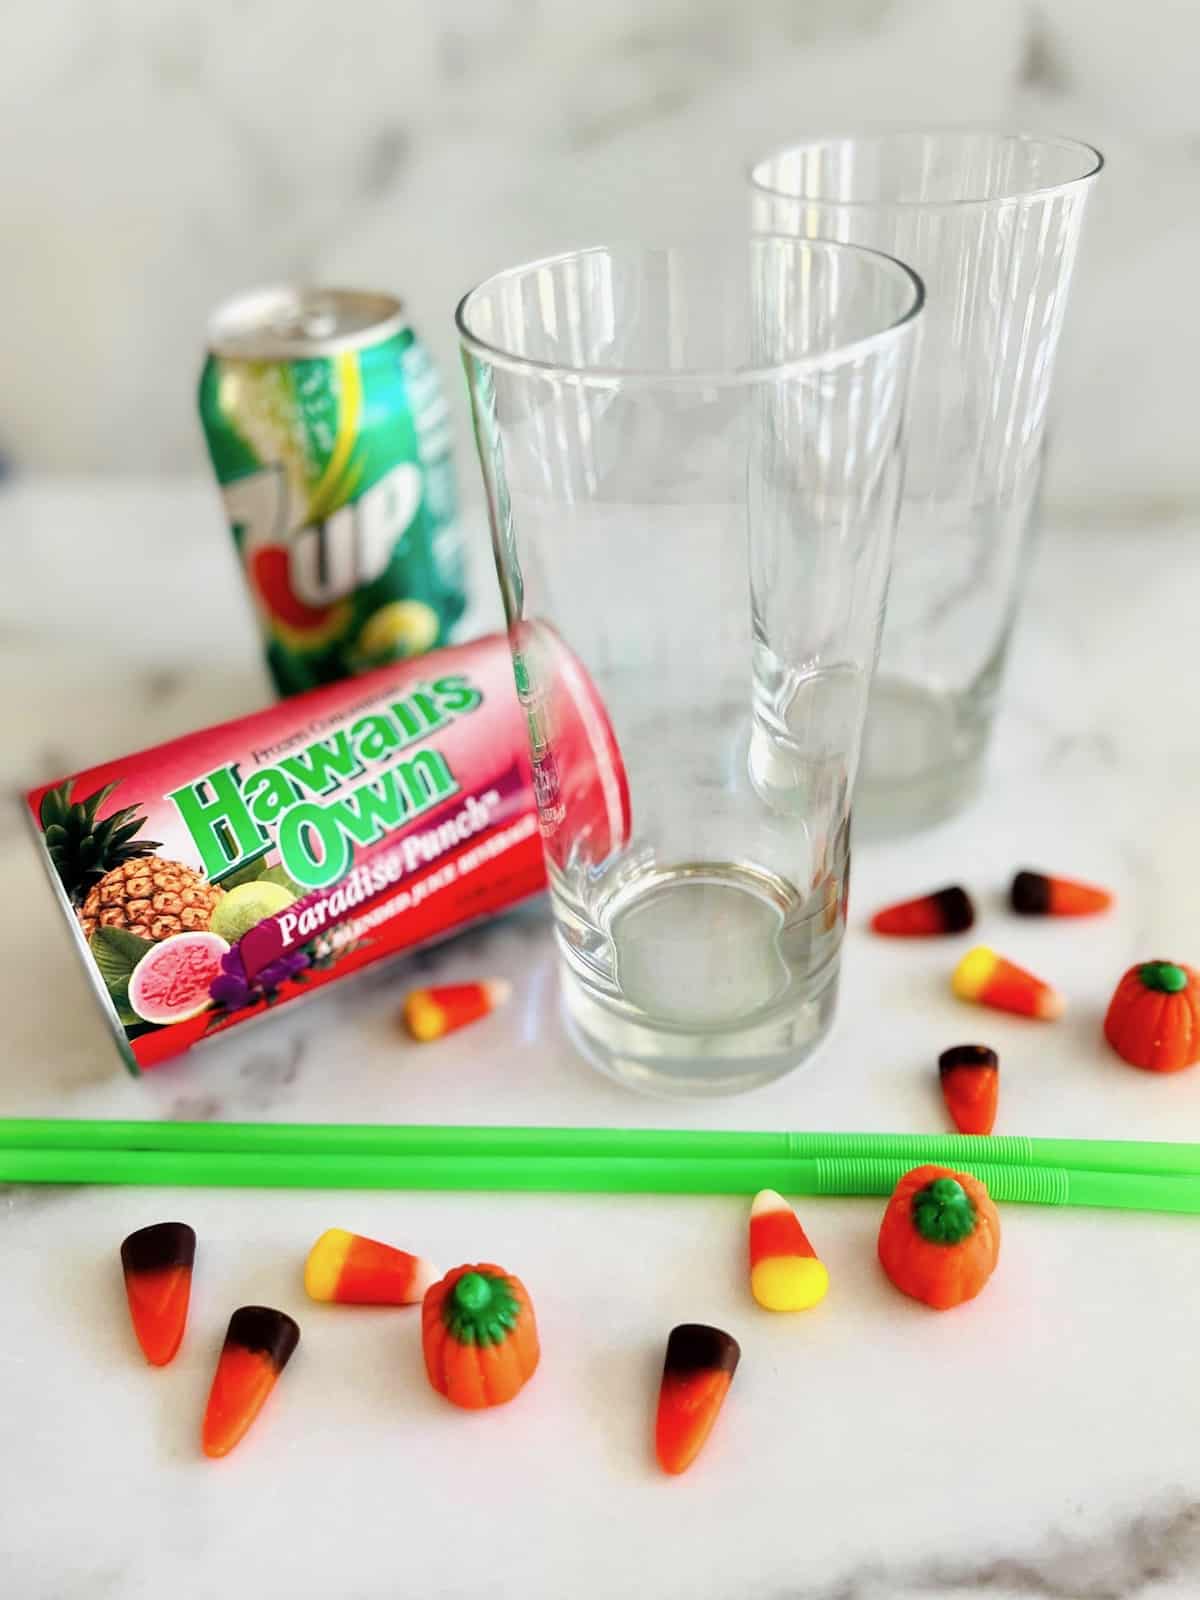 Hocus Pocus Kid-Friendly Punch ingredients and glasses.